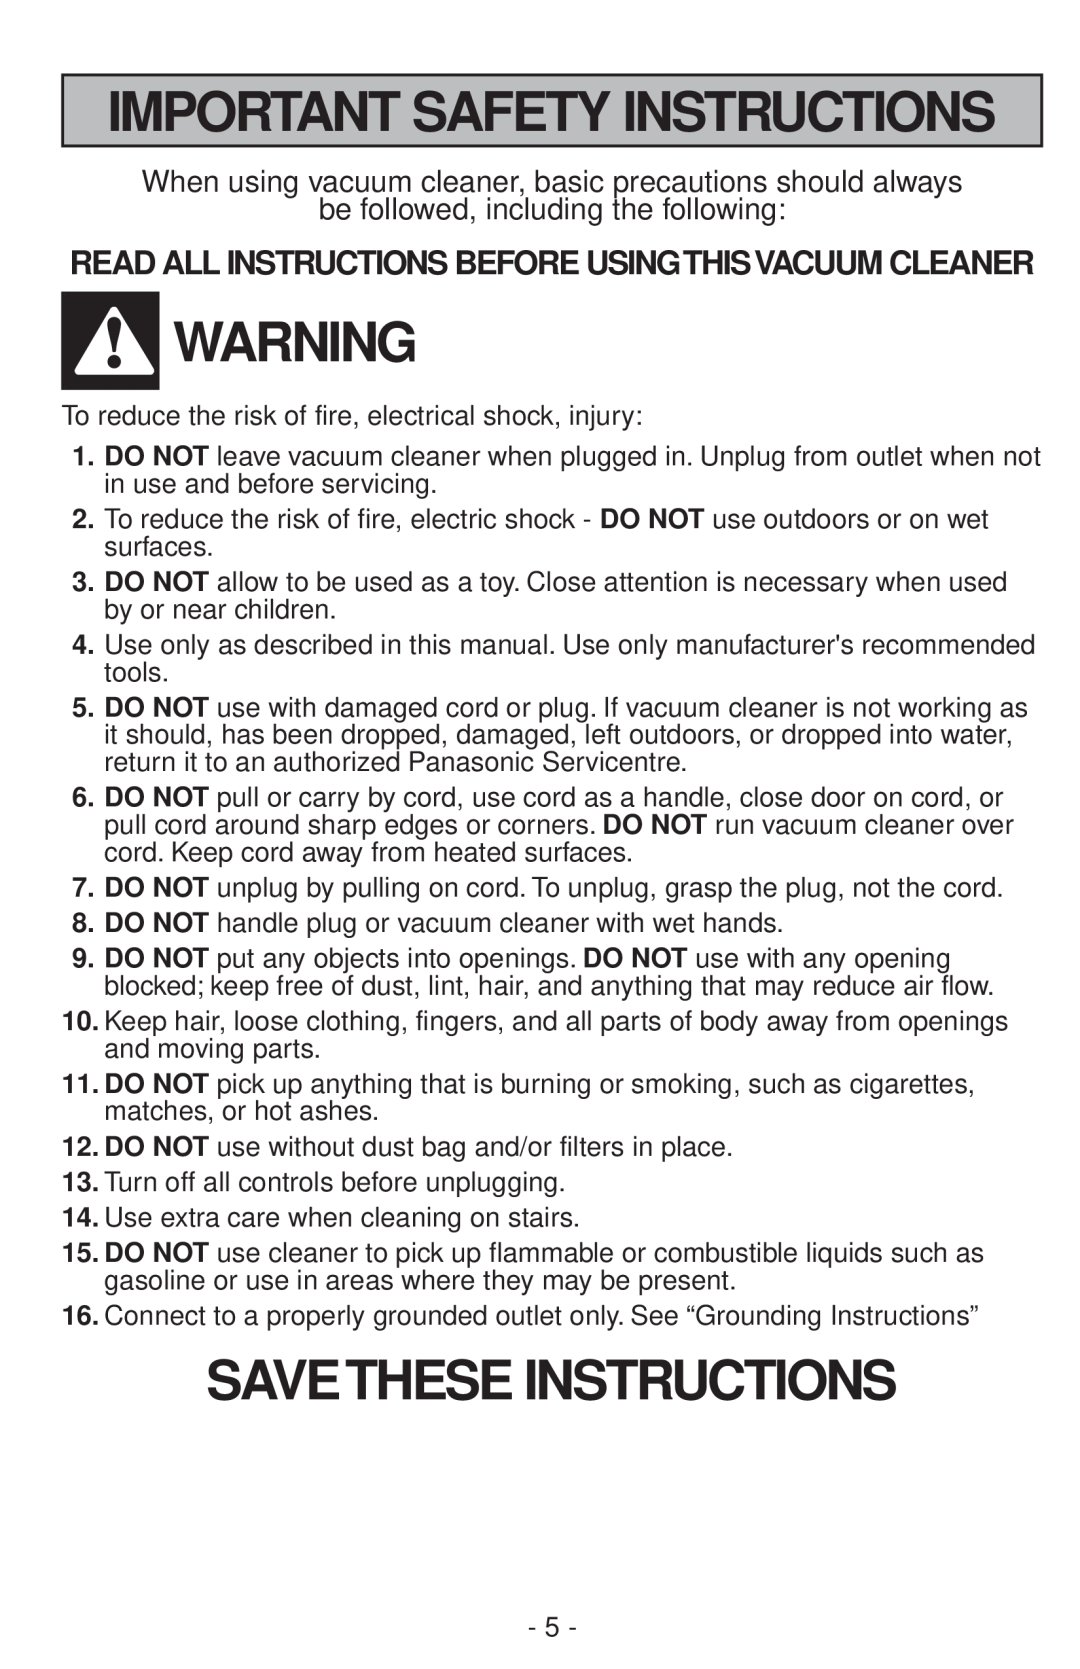 Panasonic MC-V200 manual Savethese Instructions, Important Safety Instructions, be followed, including the following 